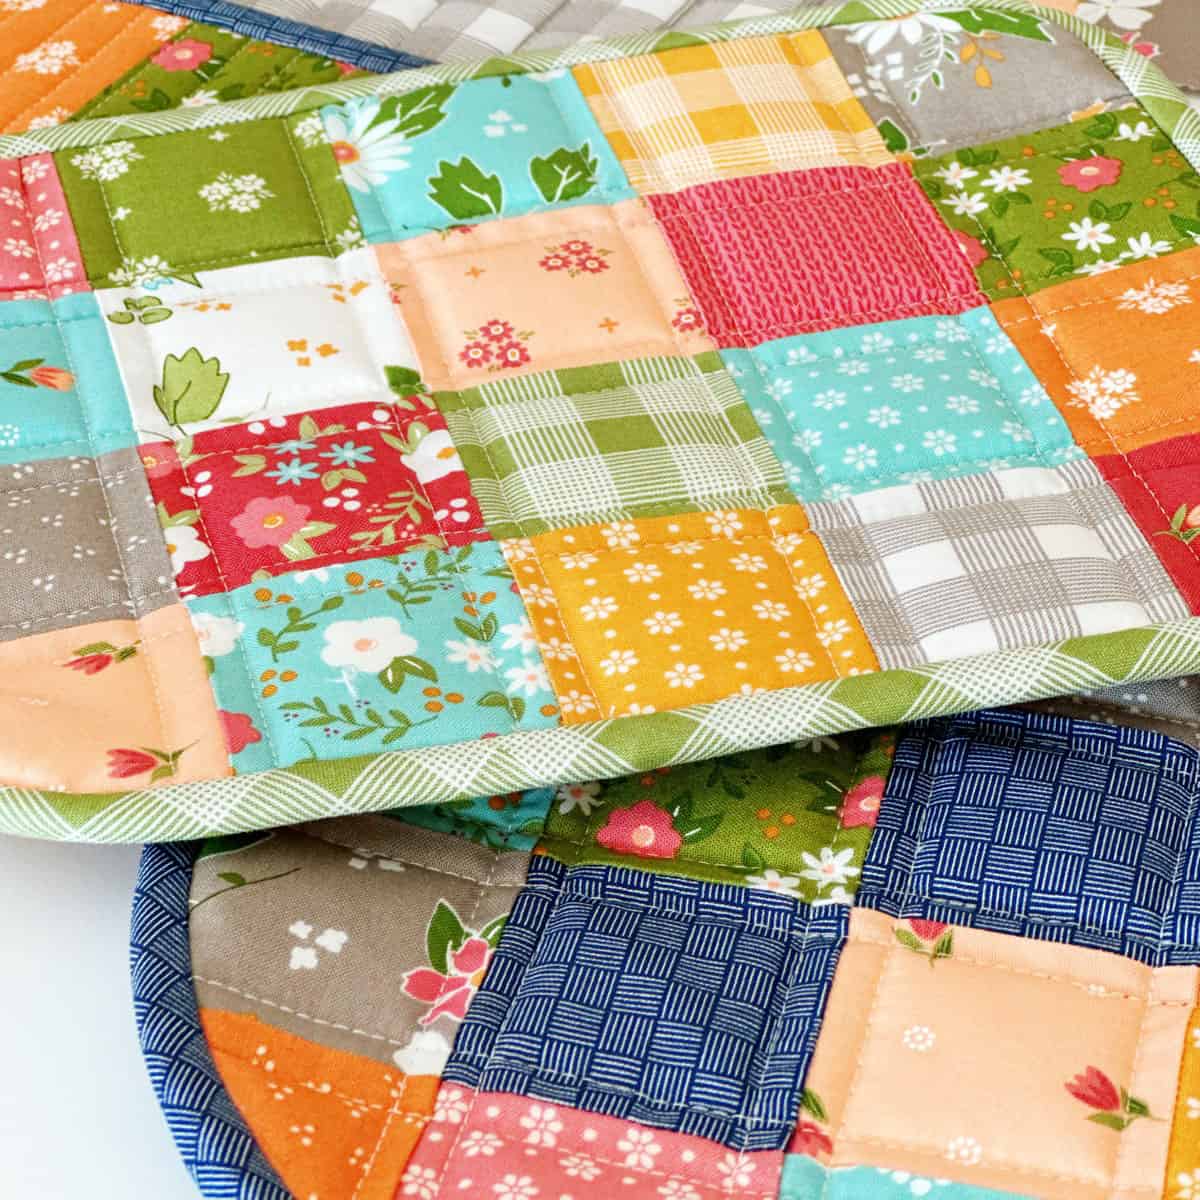 Quilted patchwork potholders by Sherri from A Quilting Life